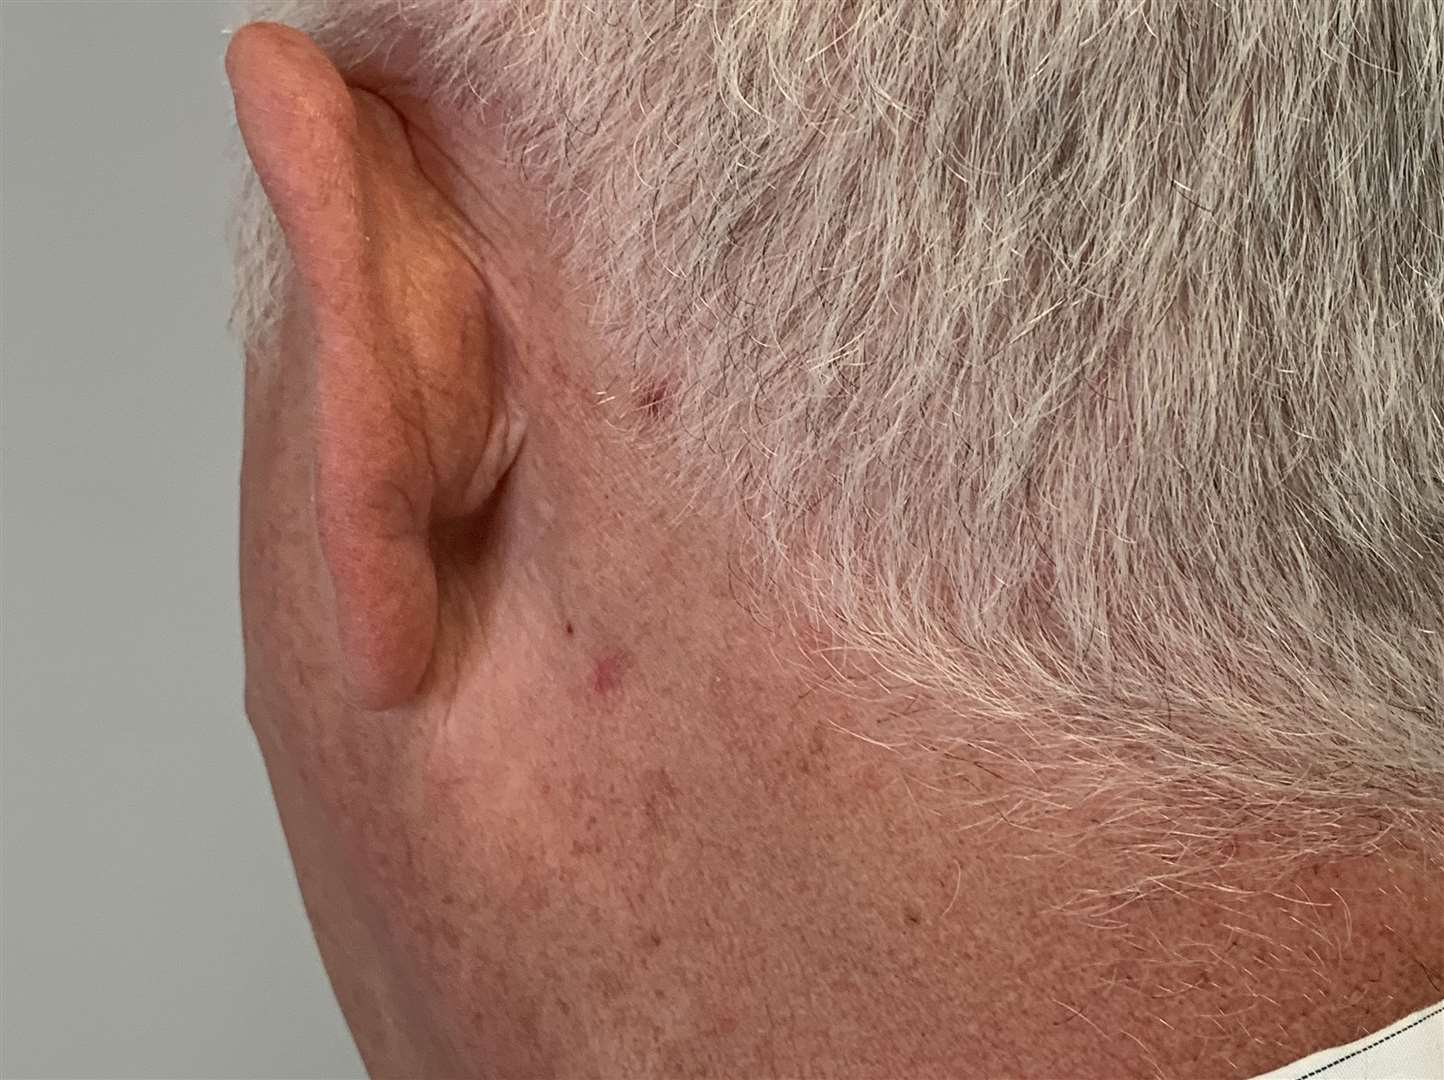 The mark on Derek's neck where a biopsy was taken for possible skin cancer (10737180)